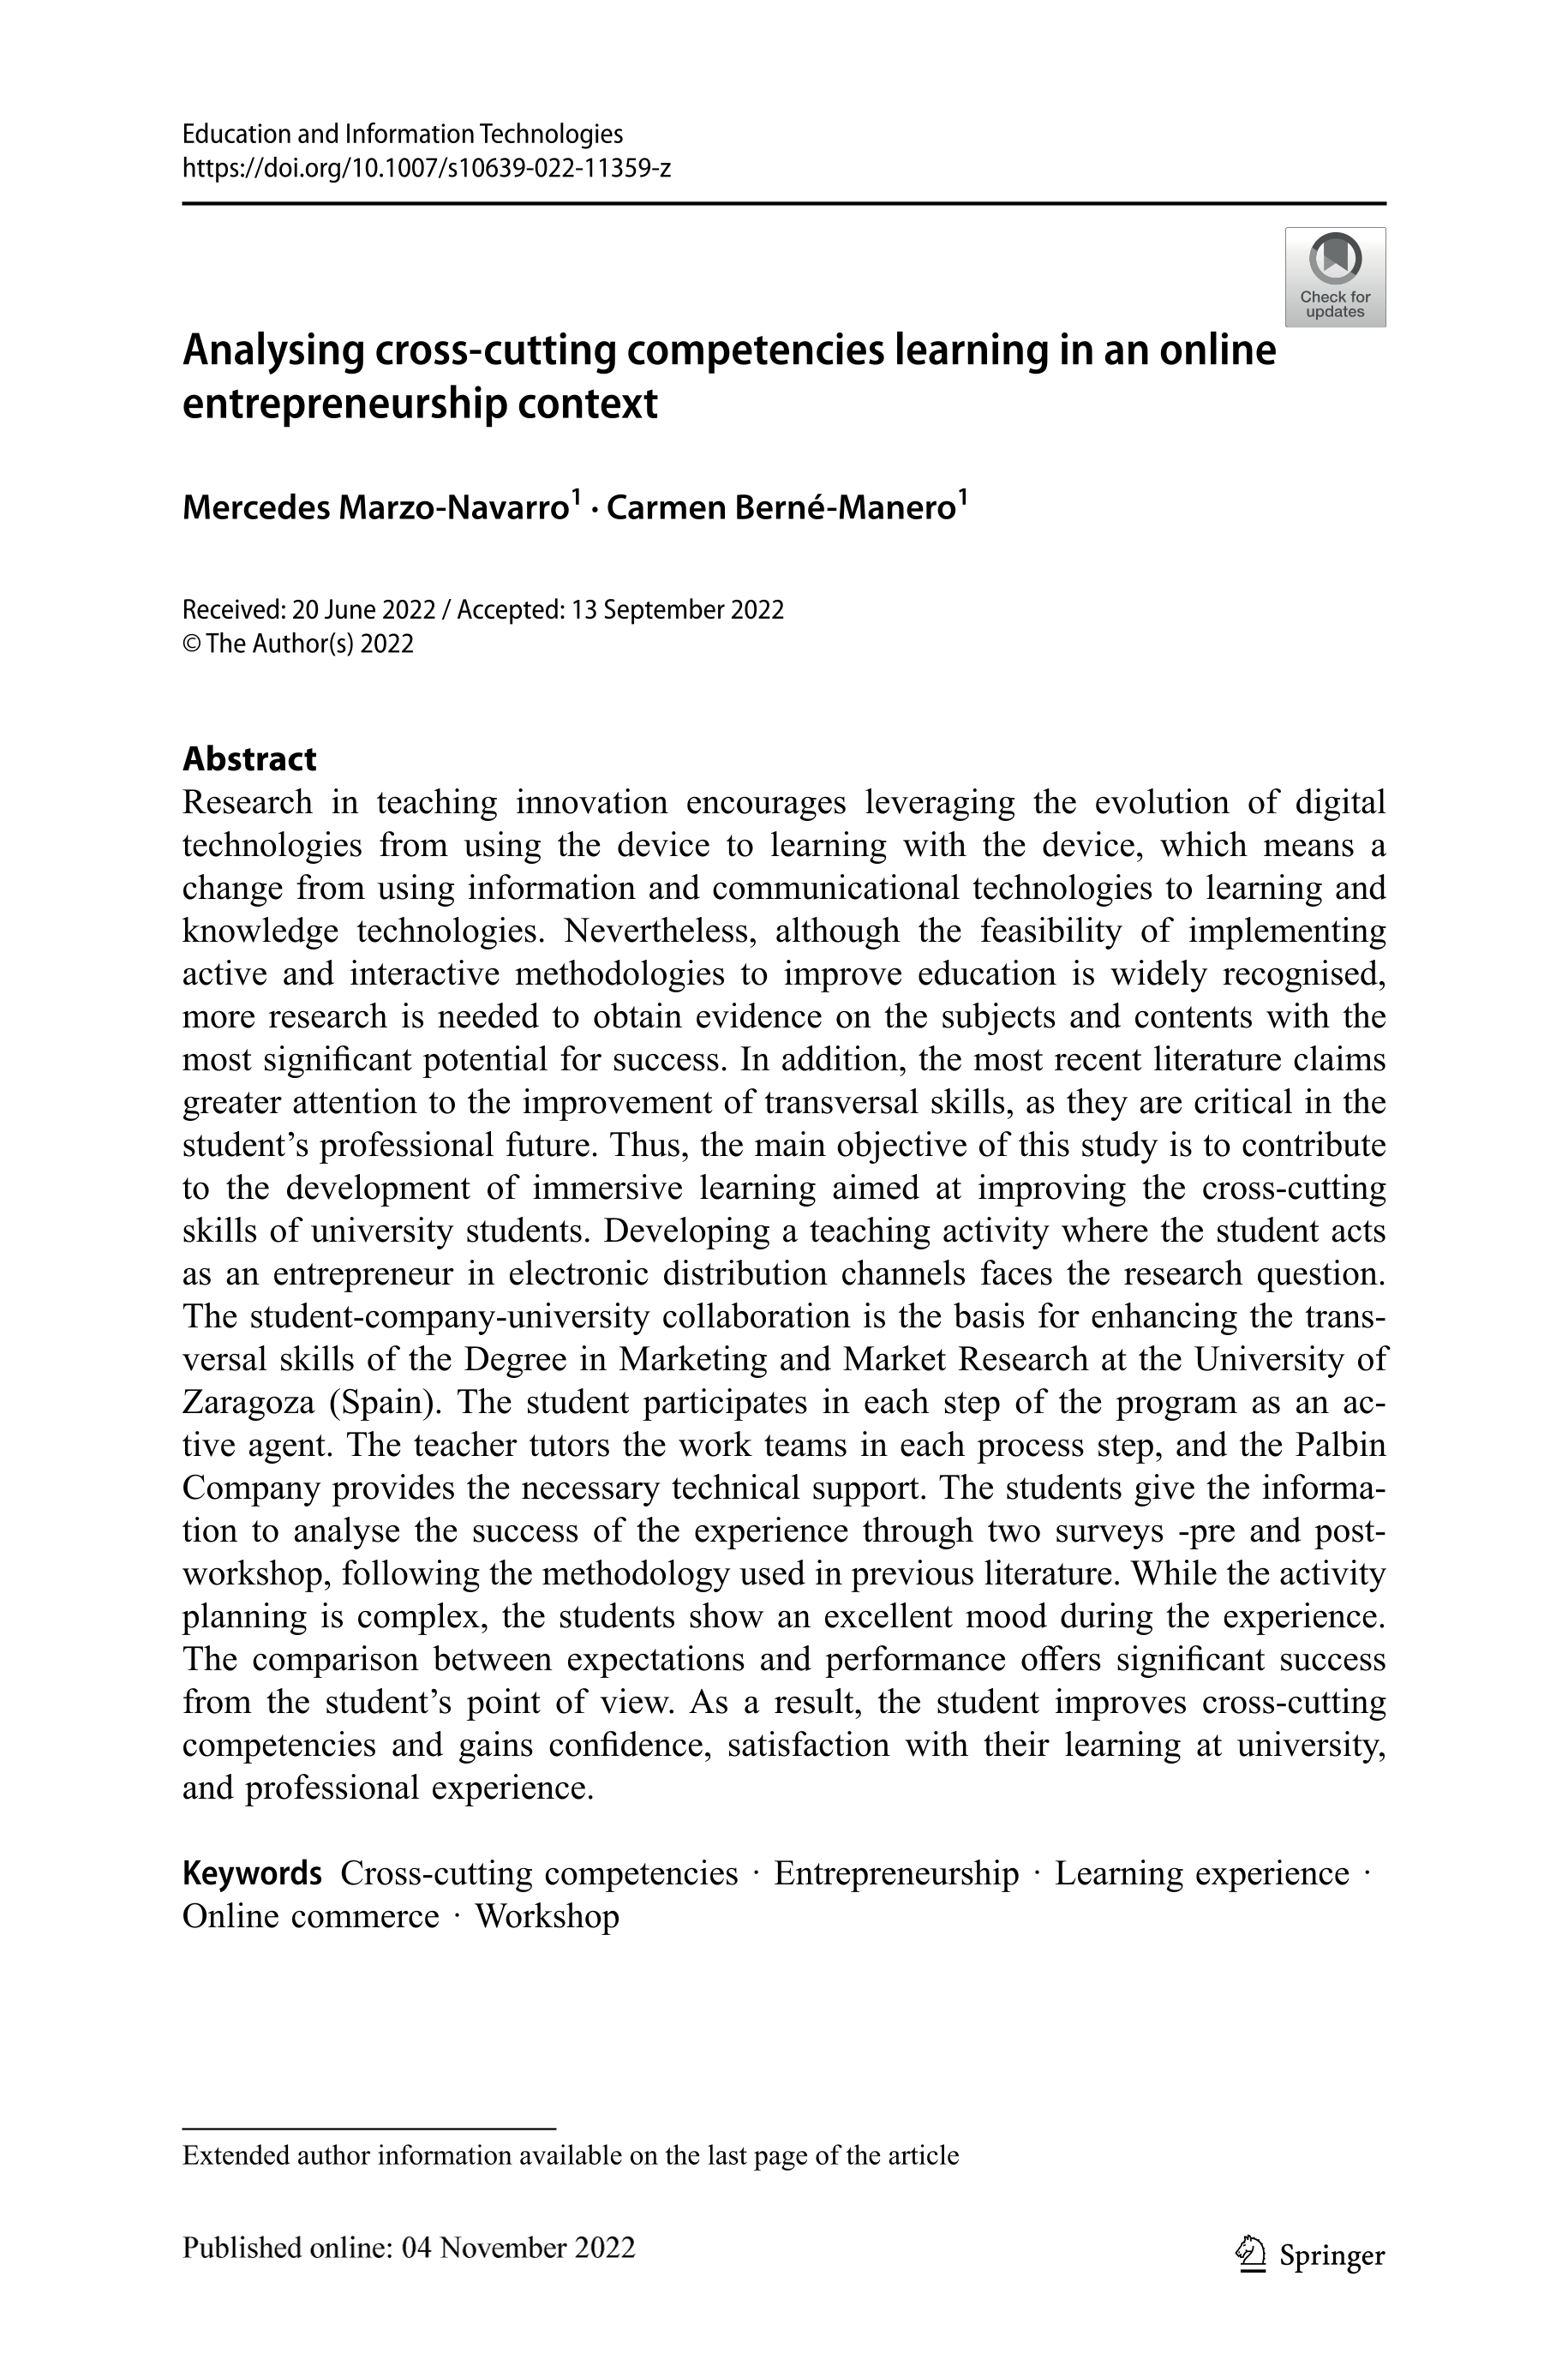 Analysing cross-cutting competencies learning in an online entrepreneurship context